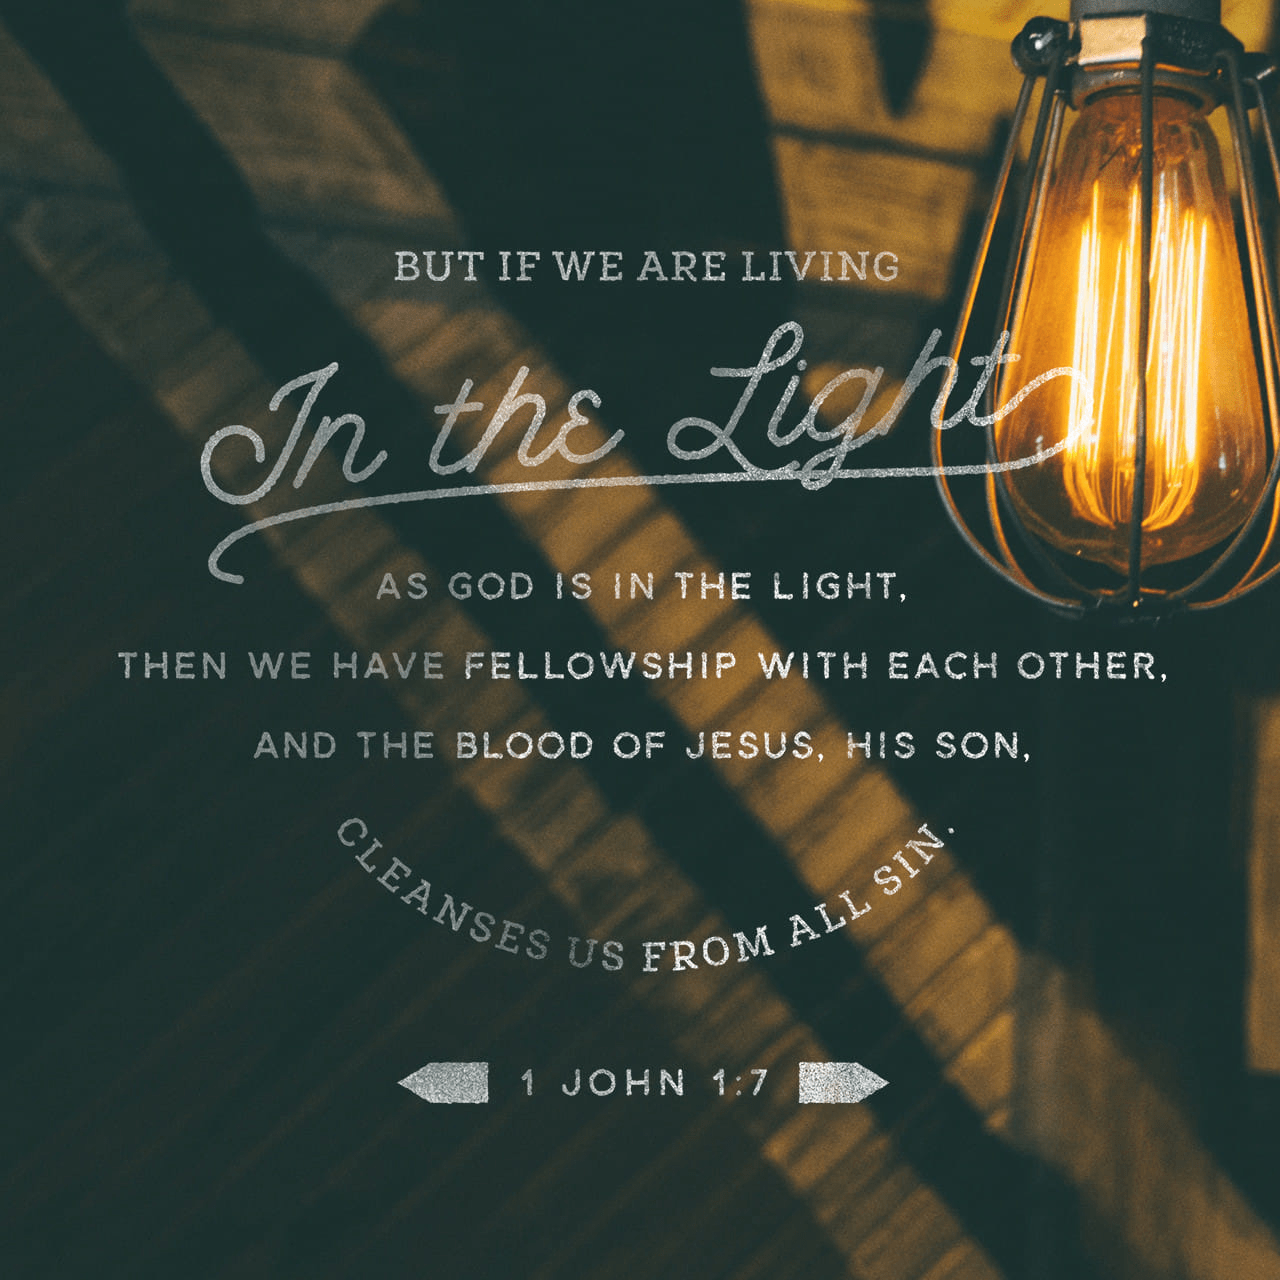 VOTD December 26 - “But if we walk in the Light as He Himself is in the Light, we have fellowship with one another, and the blood of Jesus His Son cleanses us from all sin.” ‭‭1 John‬ ‭1:7‬ ‭NASB‬‬